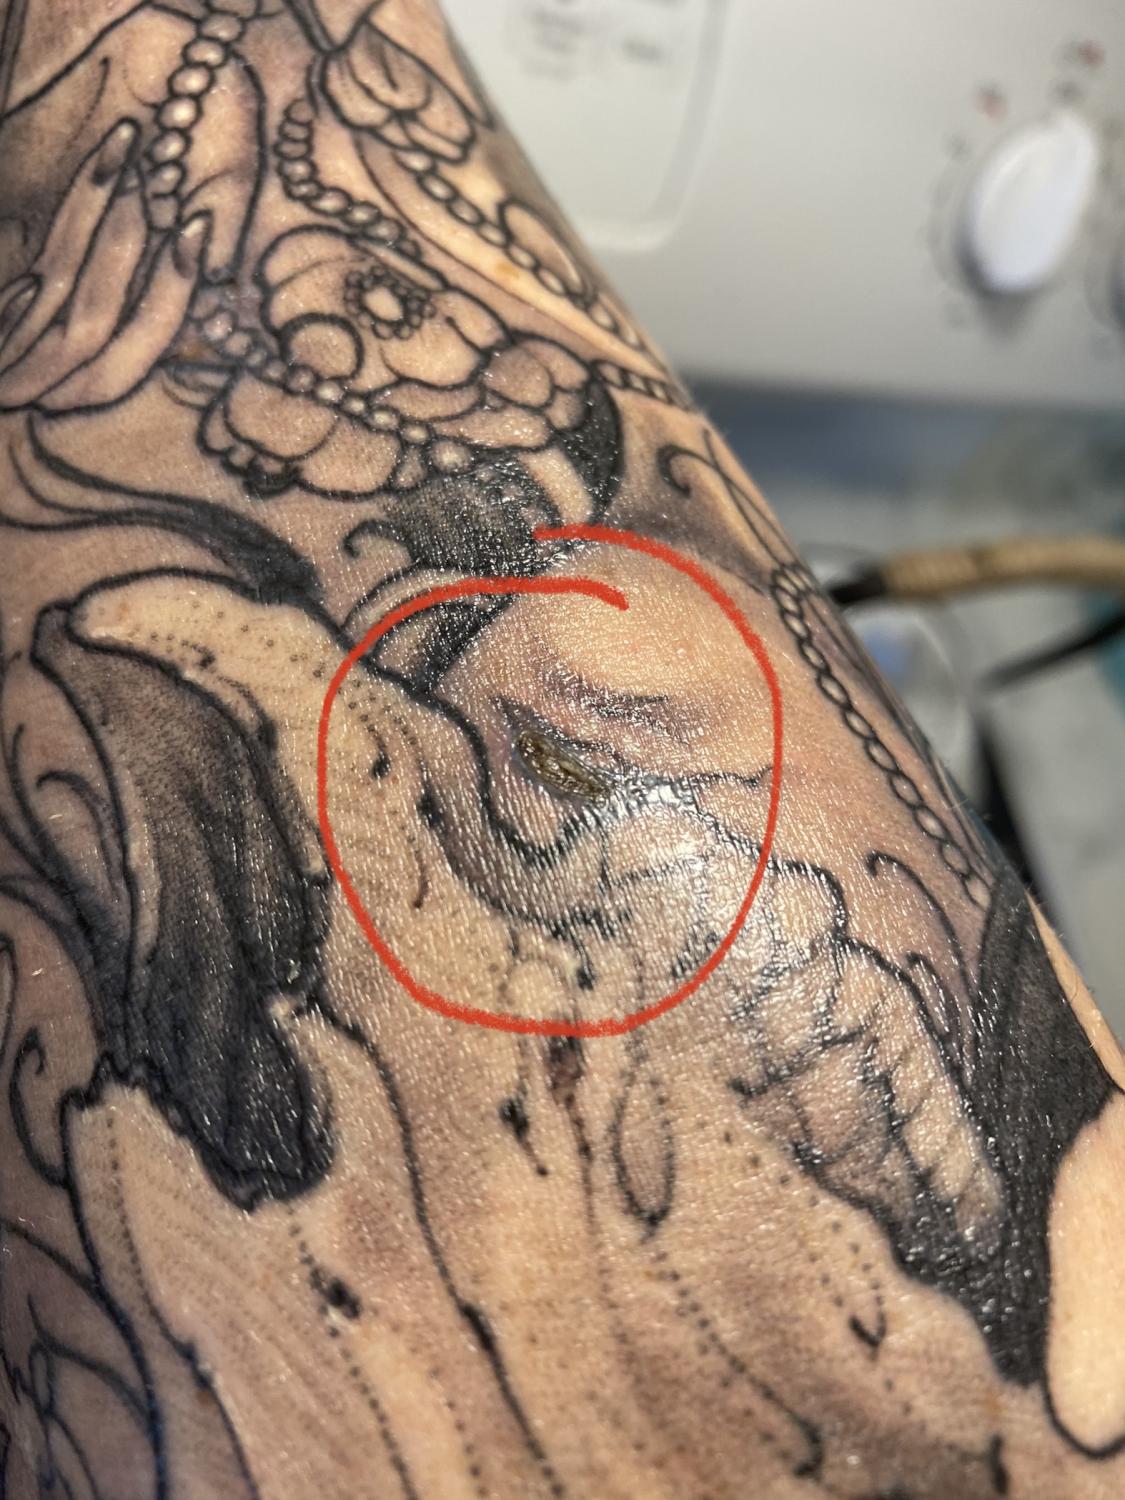 Is My New Tattoo Infected What Should I Do About It  TatRing